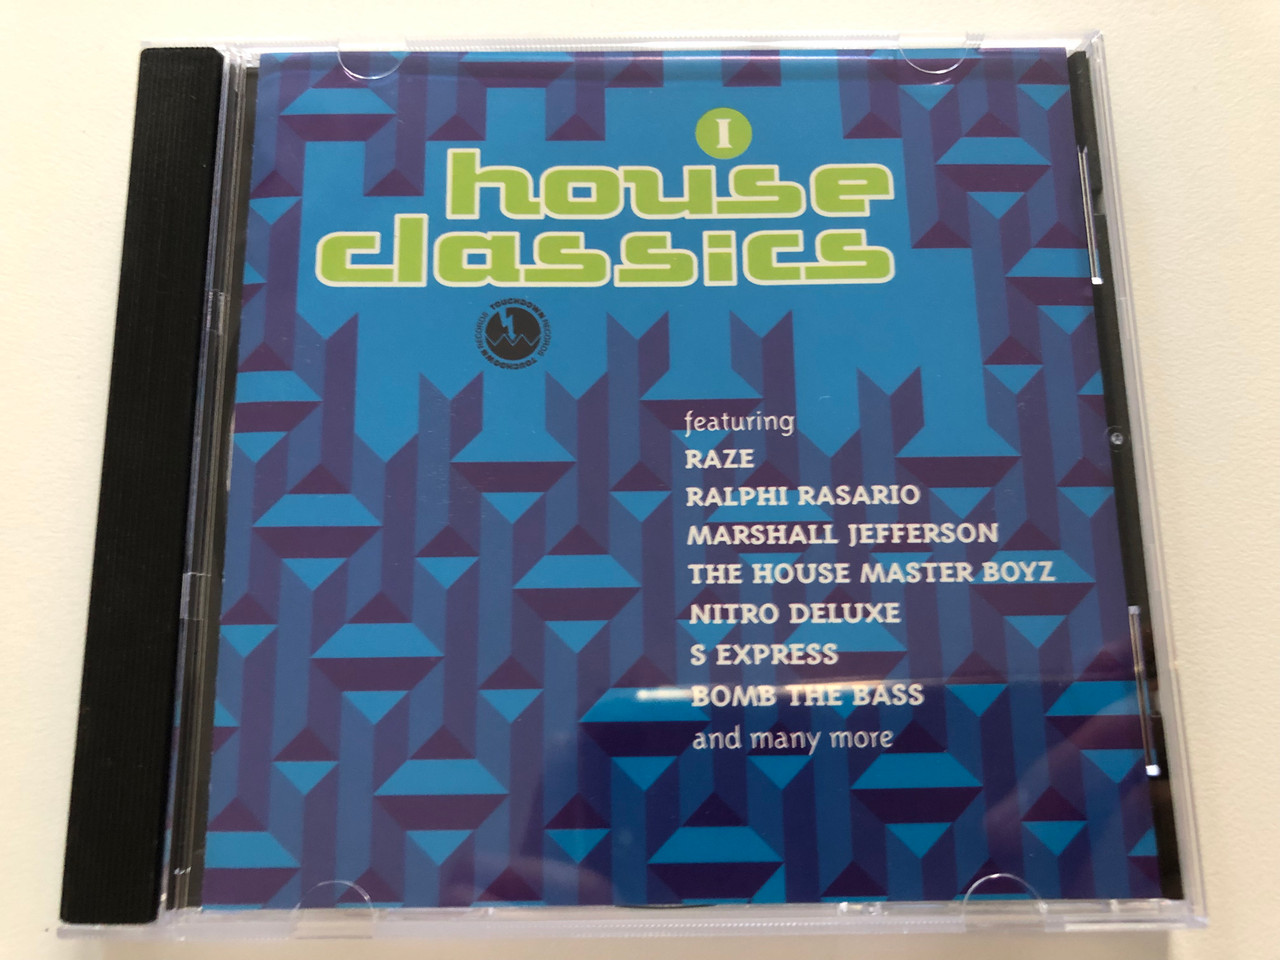 https://cdn10.bigcommerce.com/s-62bdpkt7pb/products/30987/images/182681/House_Classics_Featuring_Raze_Ralphi_Rasario_Marshall_Jefferson_The_House_Master_Boyz_Nitro_Deluxe_S_Express_Bomb_The_Bass_and_many_more_Touchdown_Records_Audio_CD_1993_CCSCD_376_1__17788.1624612350.1280.1280.JPG?c=2